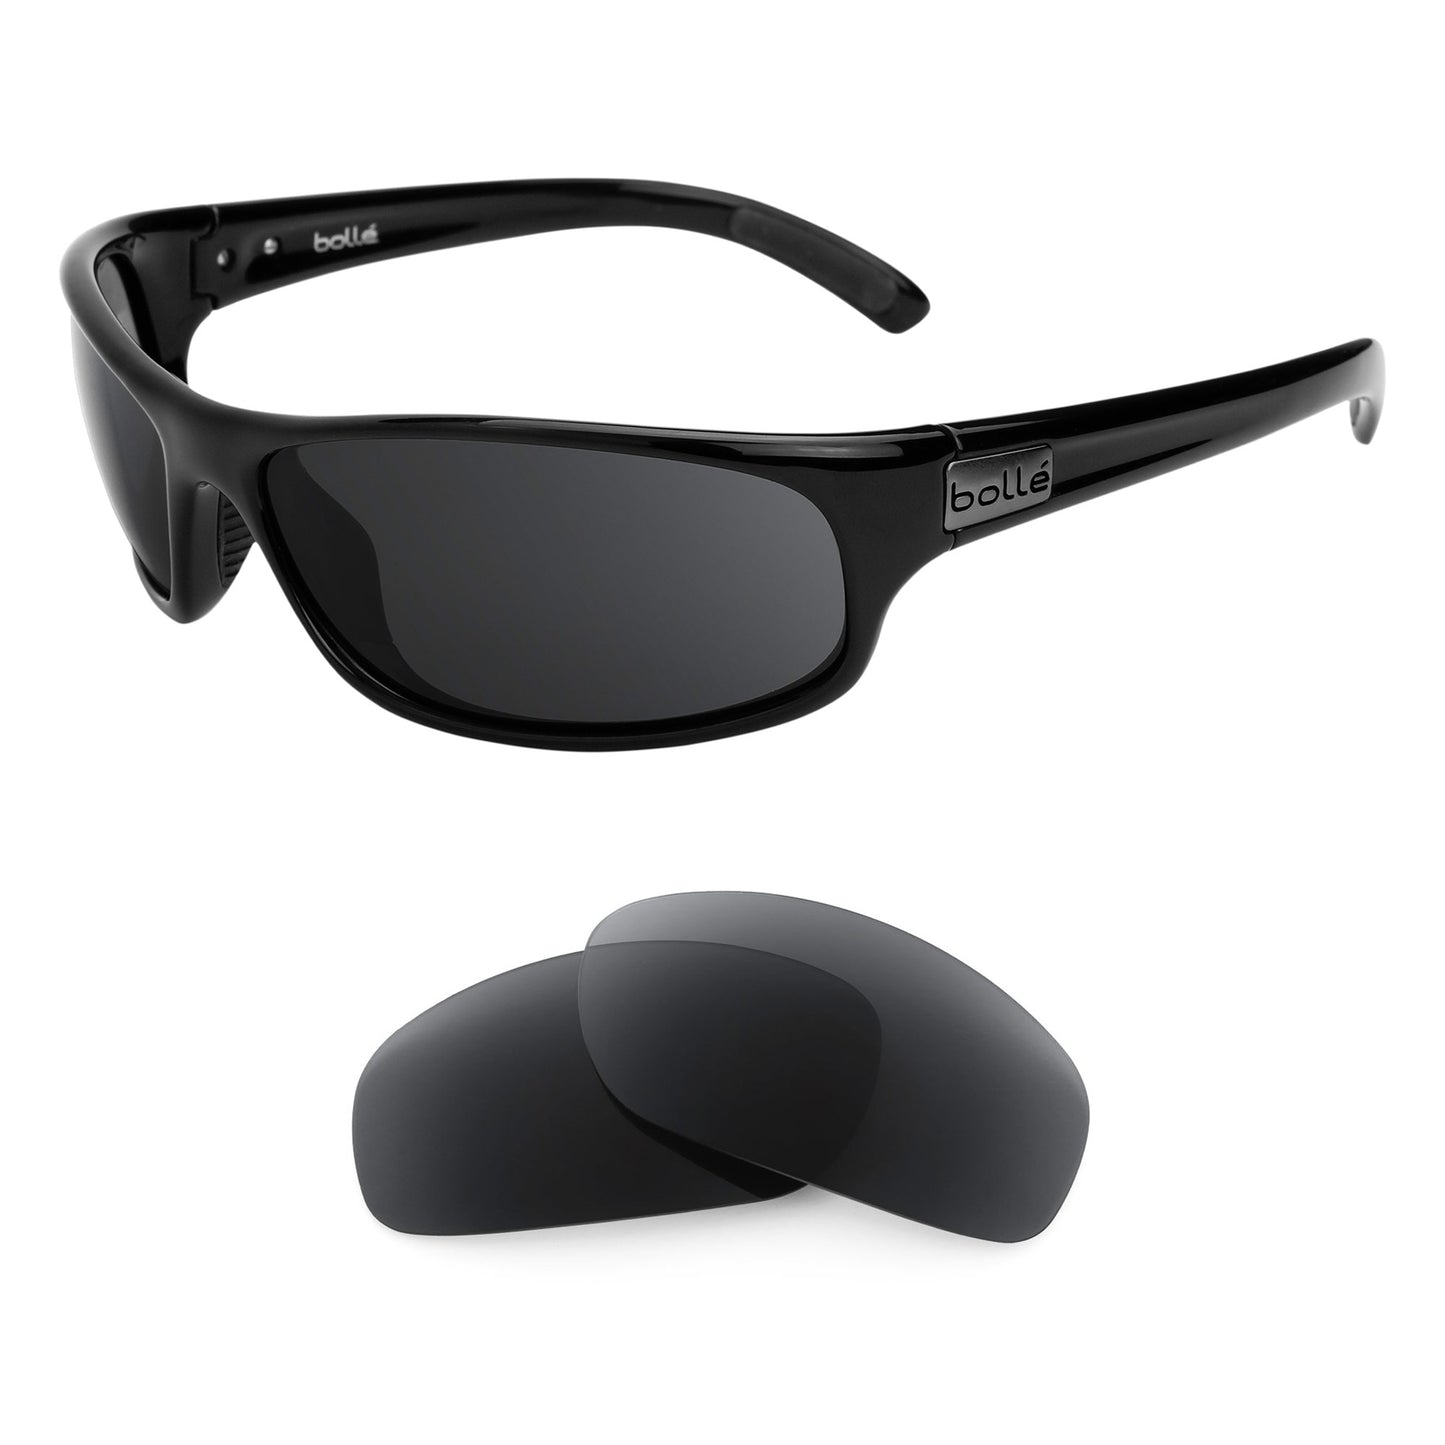 Bolle Anaconda sunglasses with replacement lenses